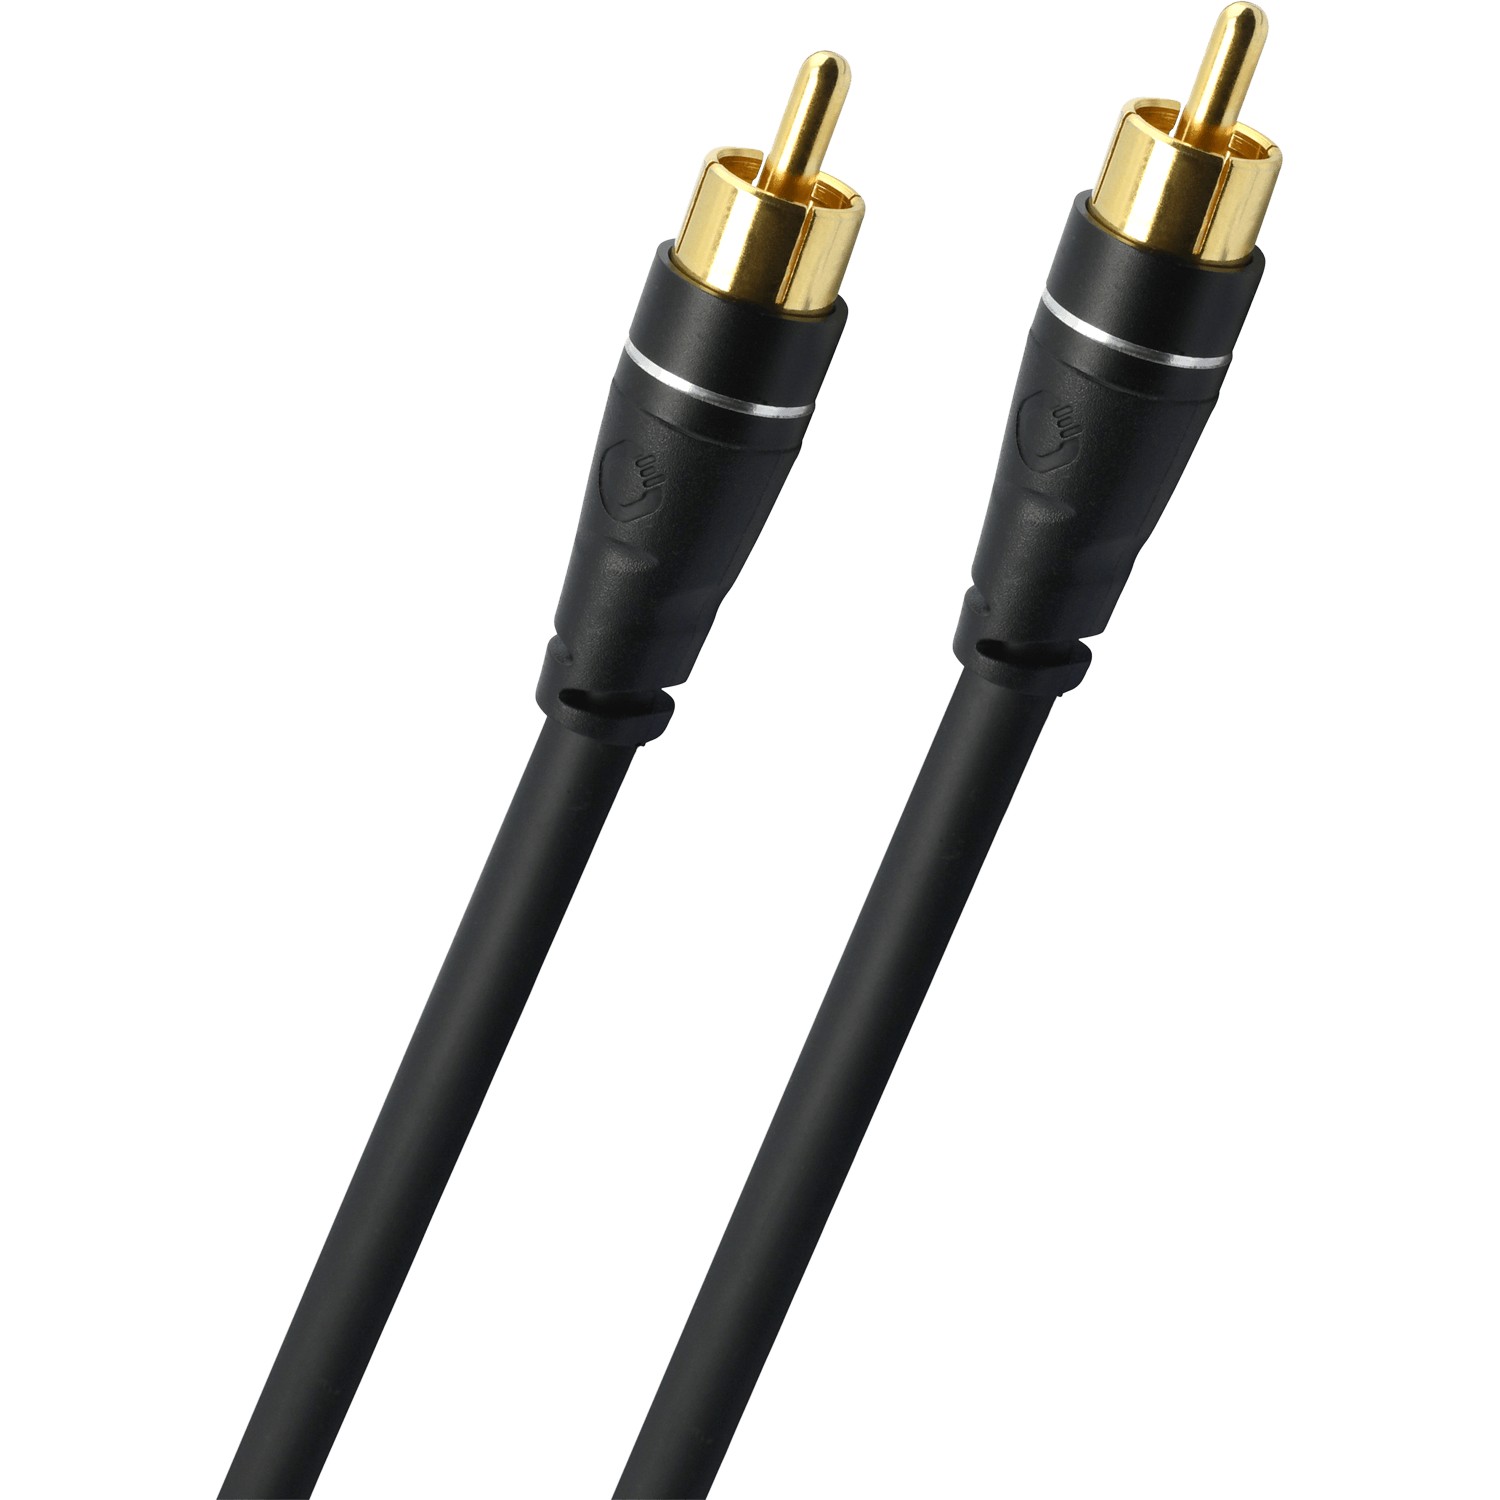 Кабели межблочные аудио Oehlbach EXCELLENCE Sub Link Subwoofer cable 5,0m bw, D1C33162 кабели межблочные аудио oehlbach state of the art xxl cable rca 2x2 00m gold d1c13116